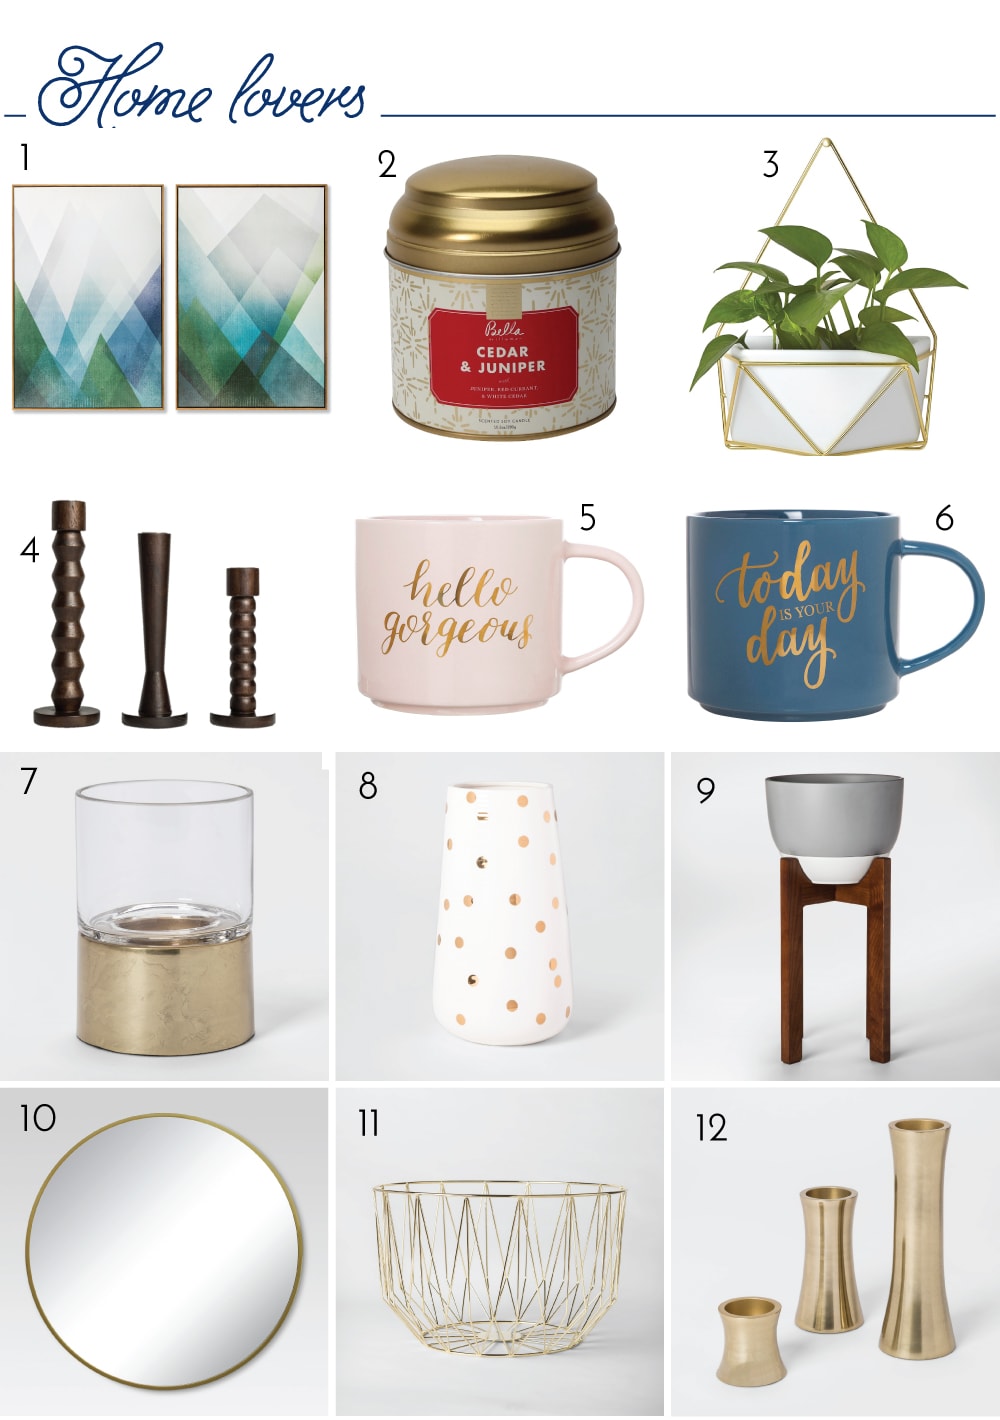 Looking for the perfect gift for the craft, organization or home lover in your life? Check out this gift guide full of fun, unique and useful finds!